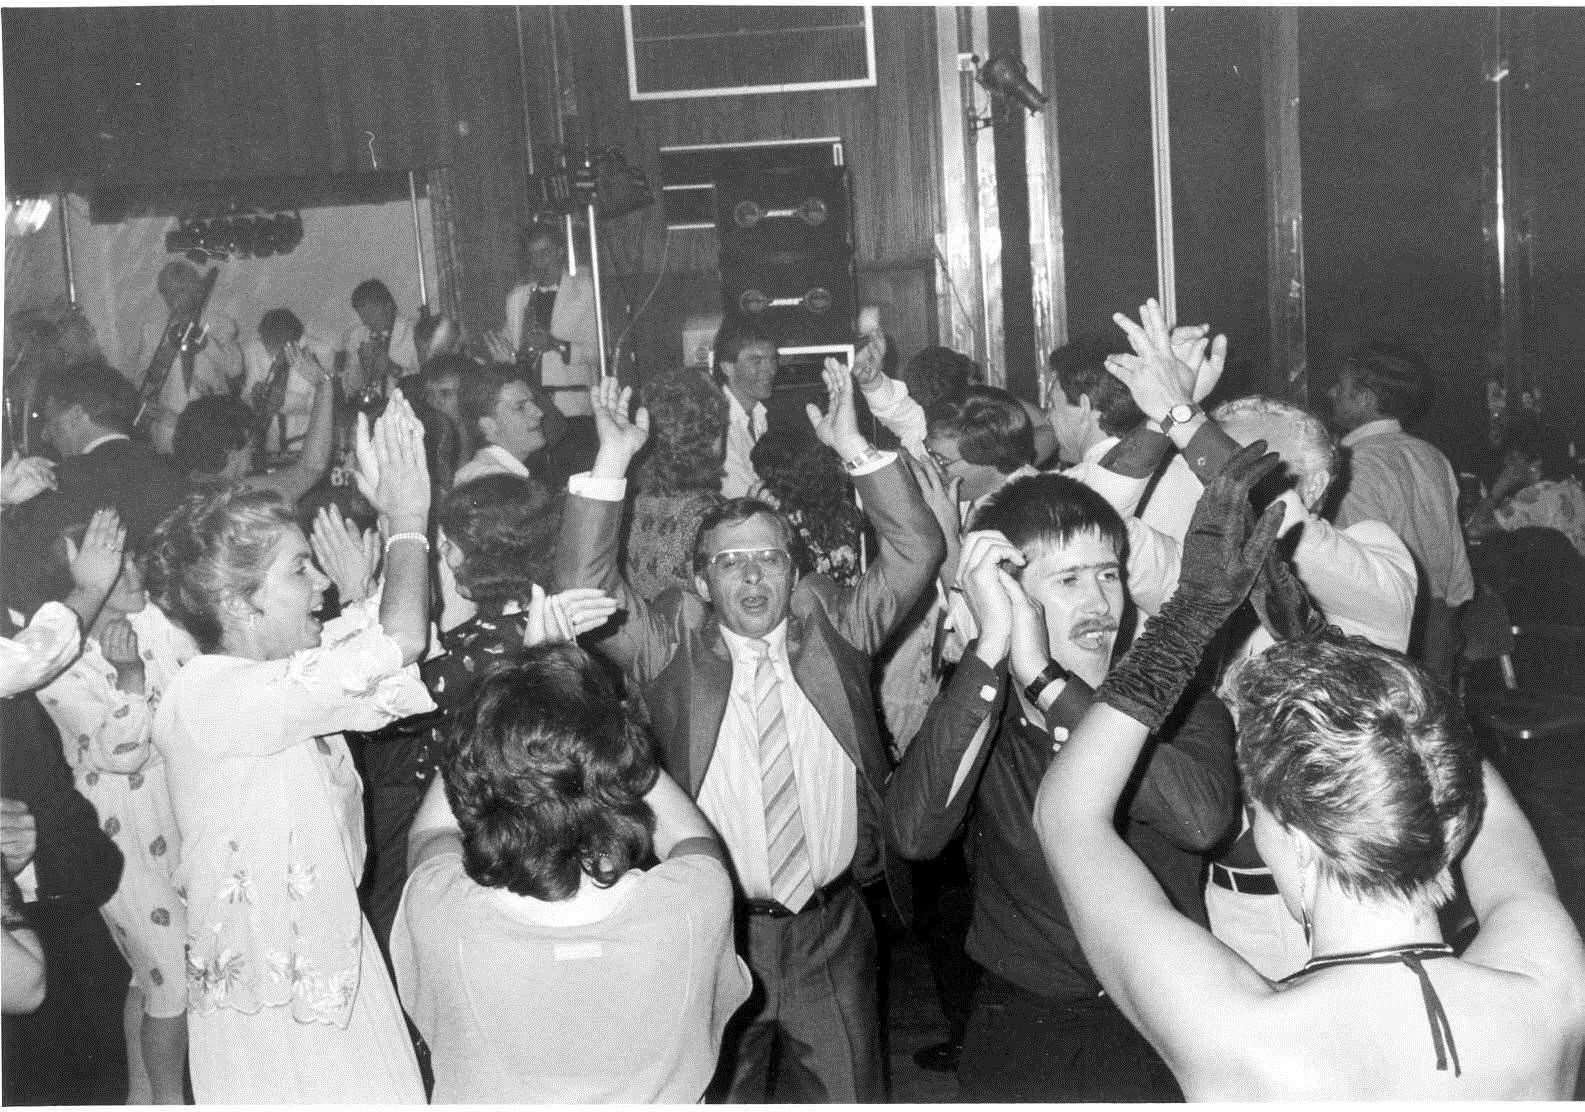 The Kent Messenger Social Club Dinner Dance at the Royal Star Hotel, Maidstone, in 1986